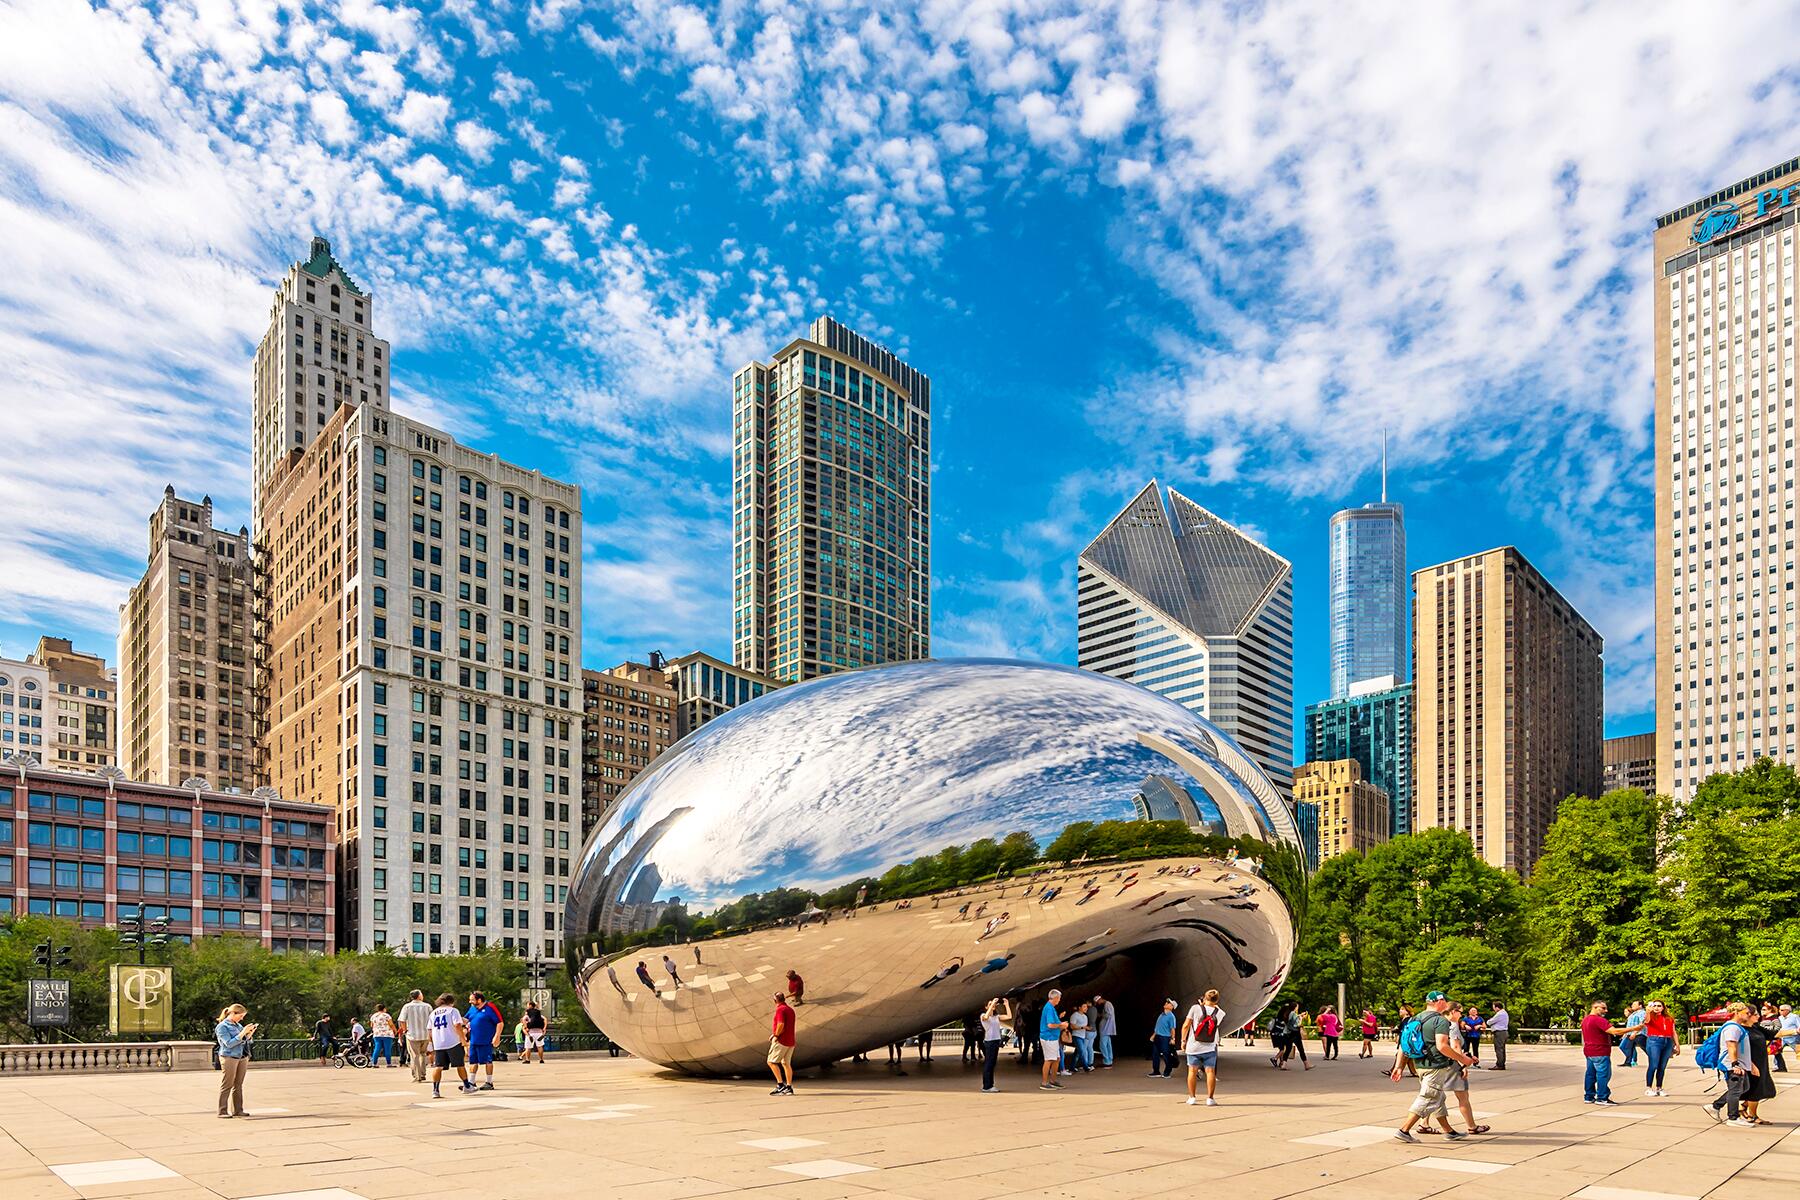 Ultimate Things To See And Do In Chicago